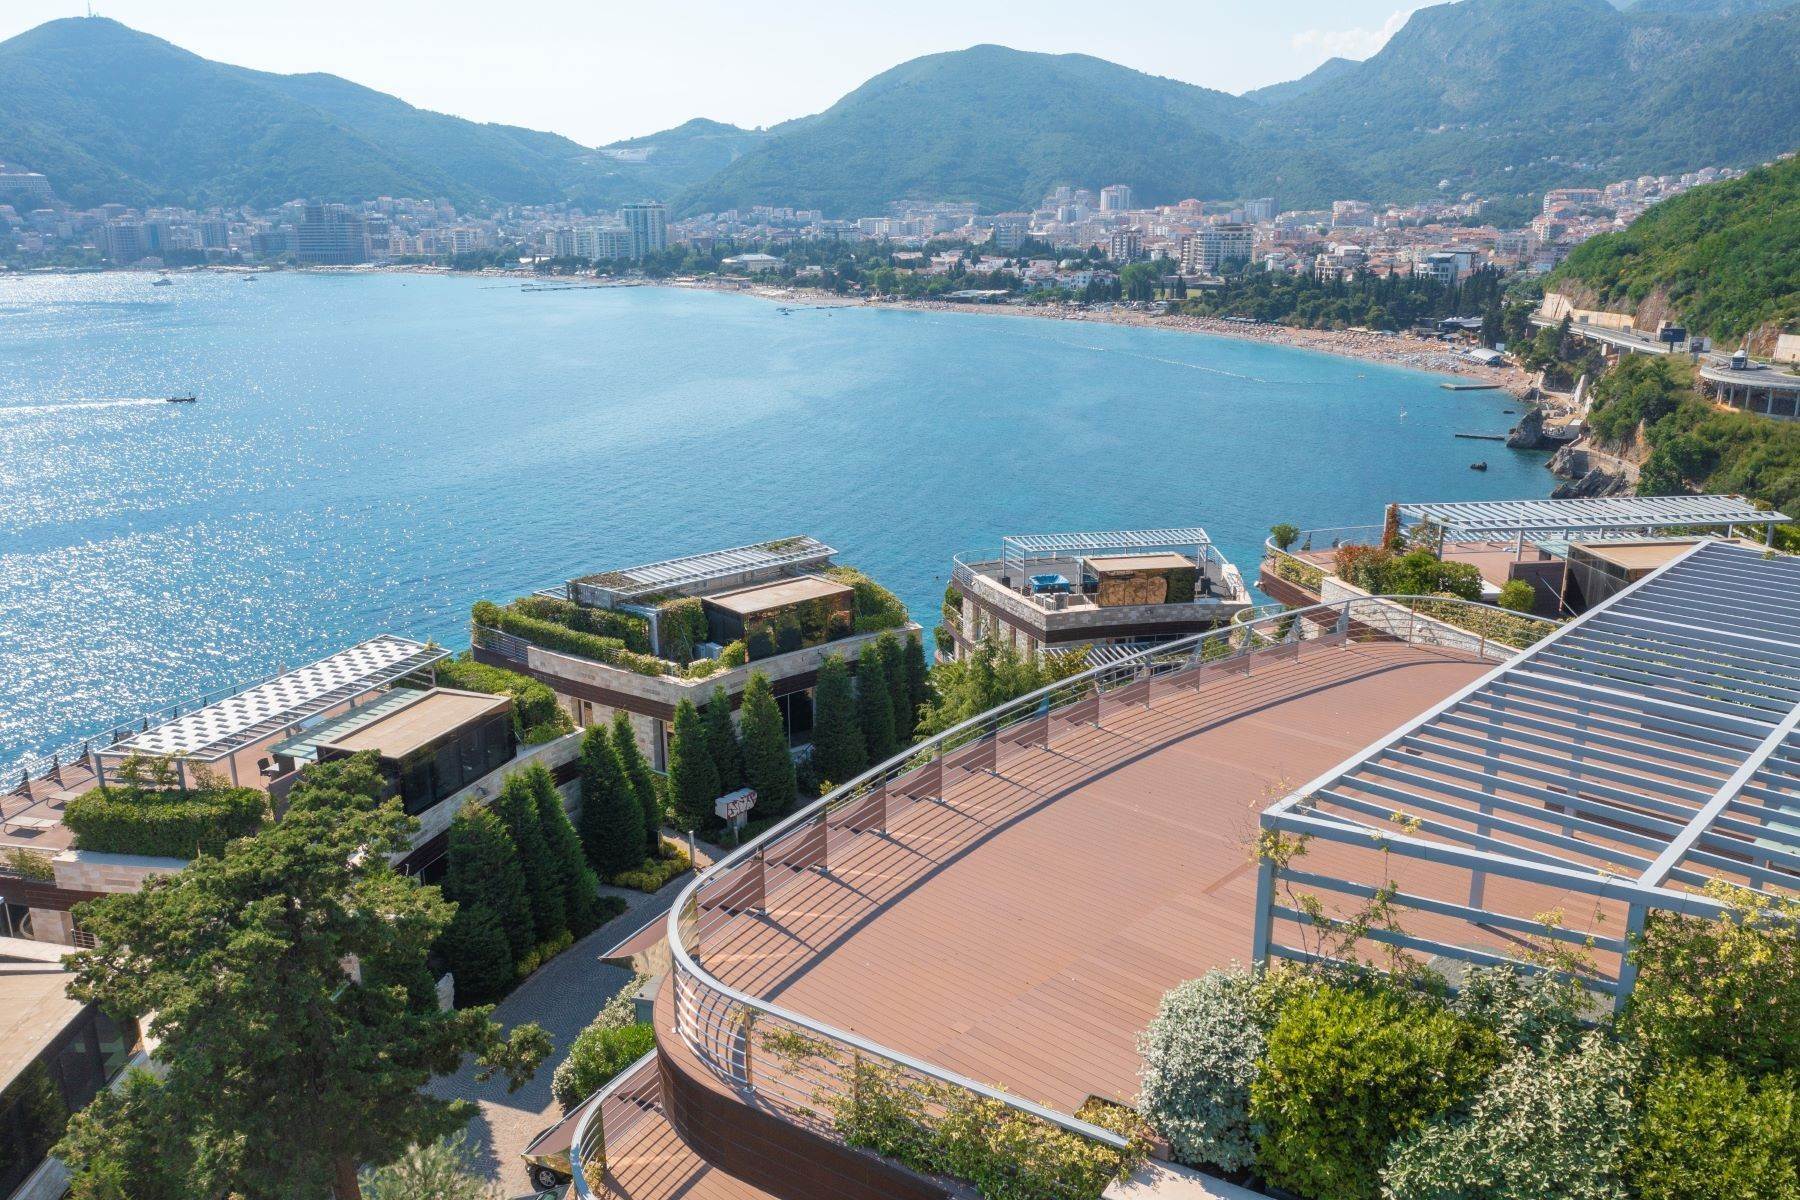 Duplex Homes for Sale at Dukley Gardens Penthouse Budva, Dukley Gardens Budva, Budva 85310 Montenegro